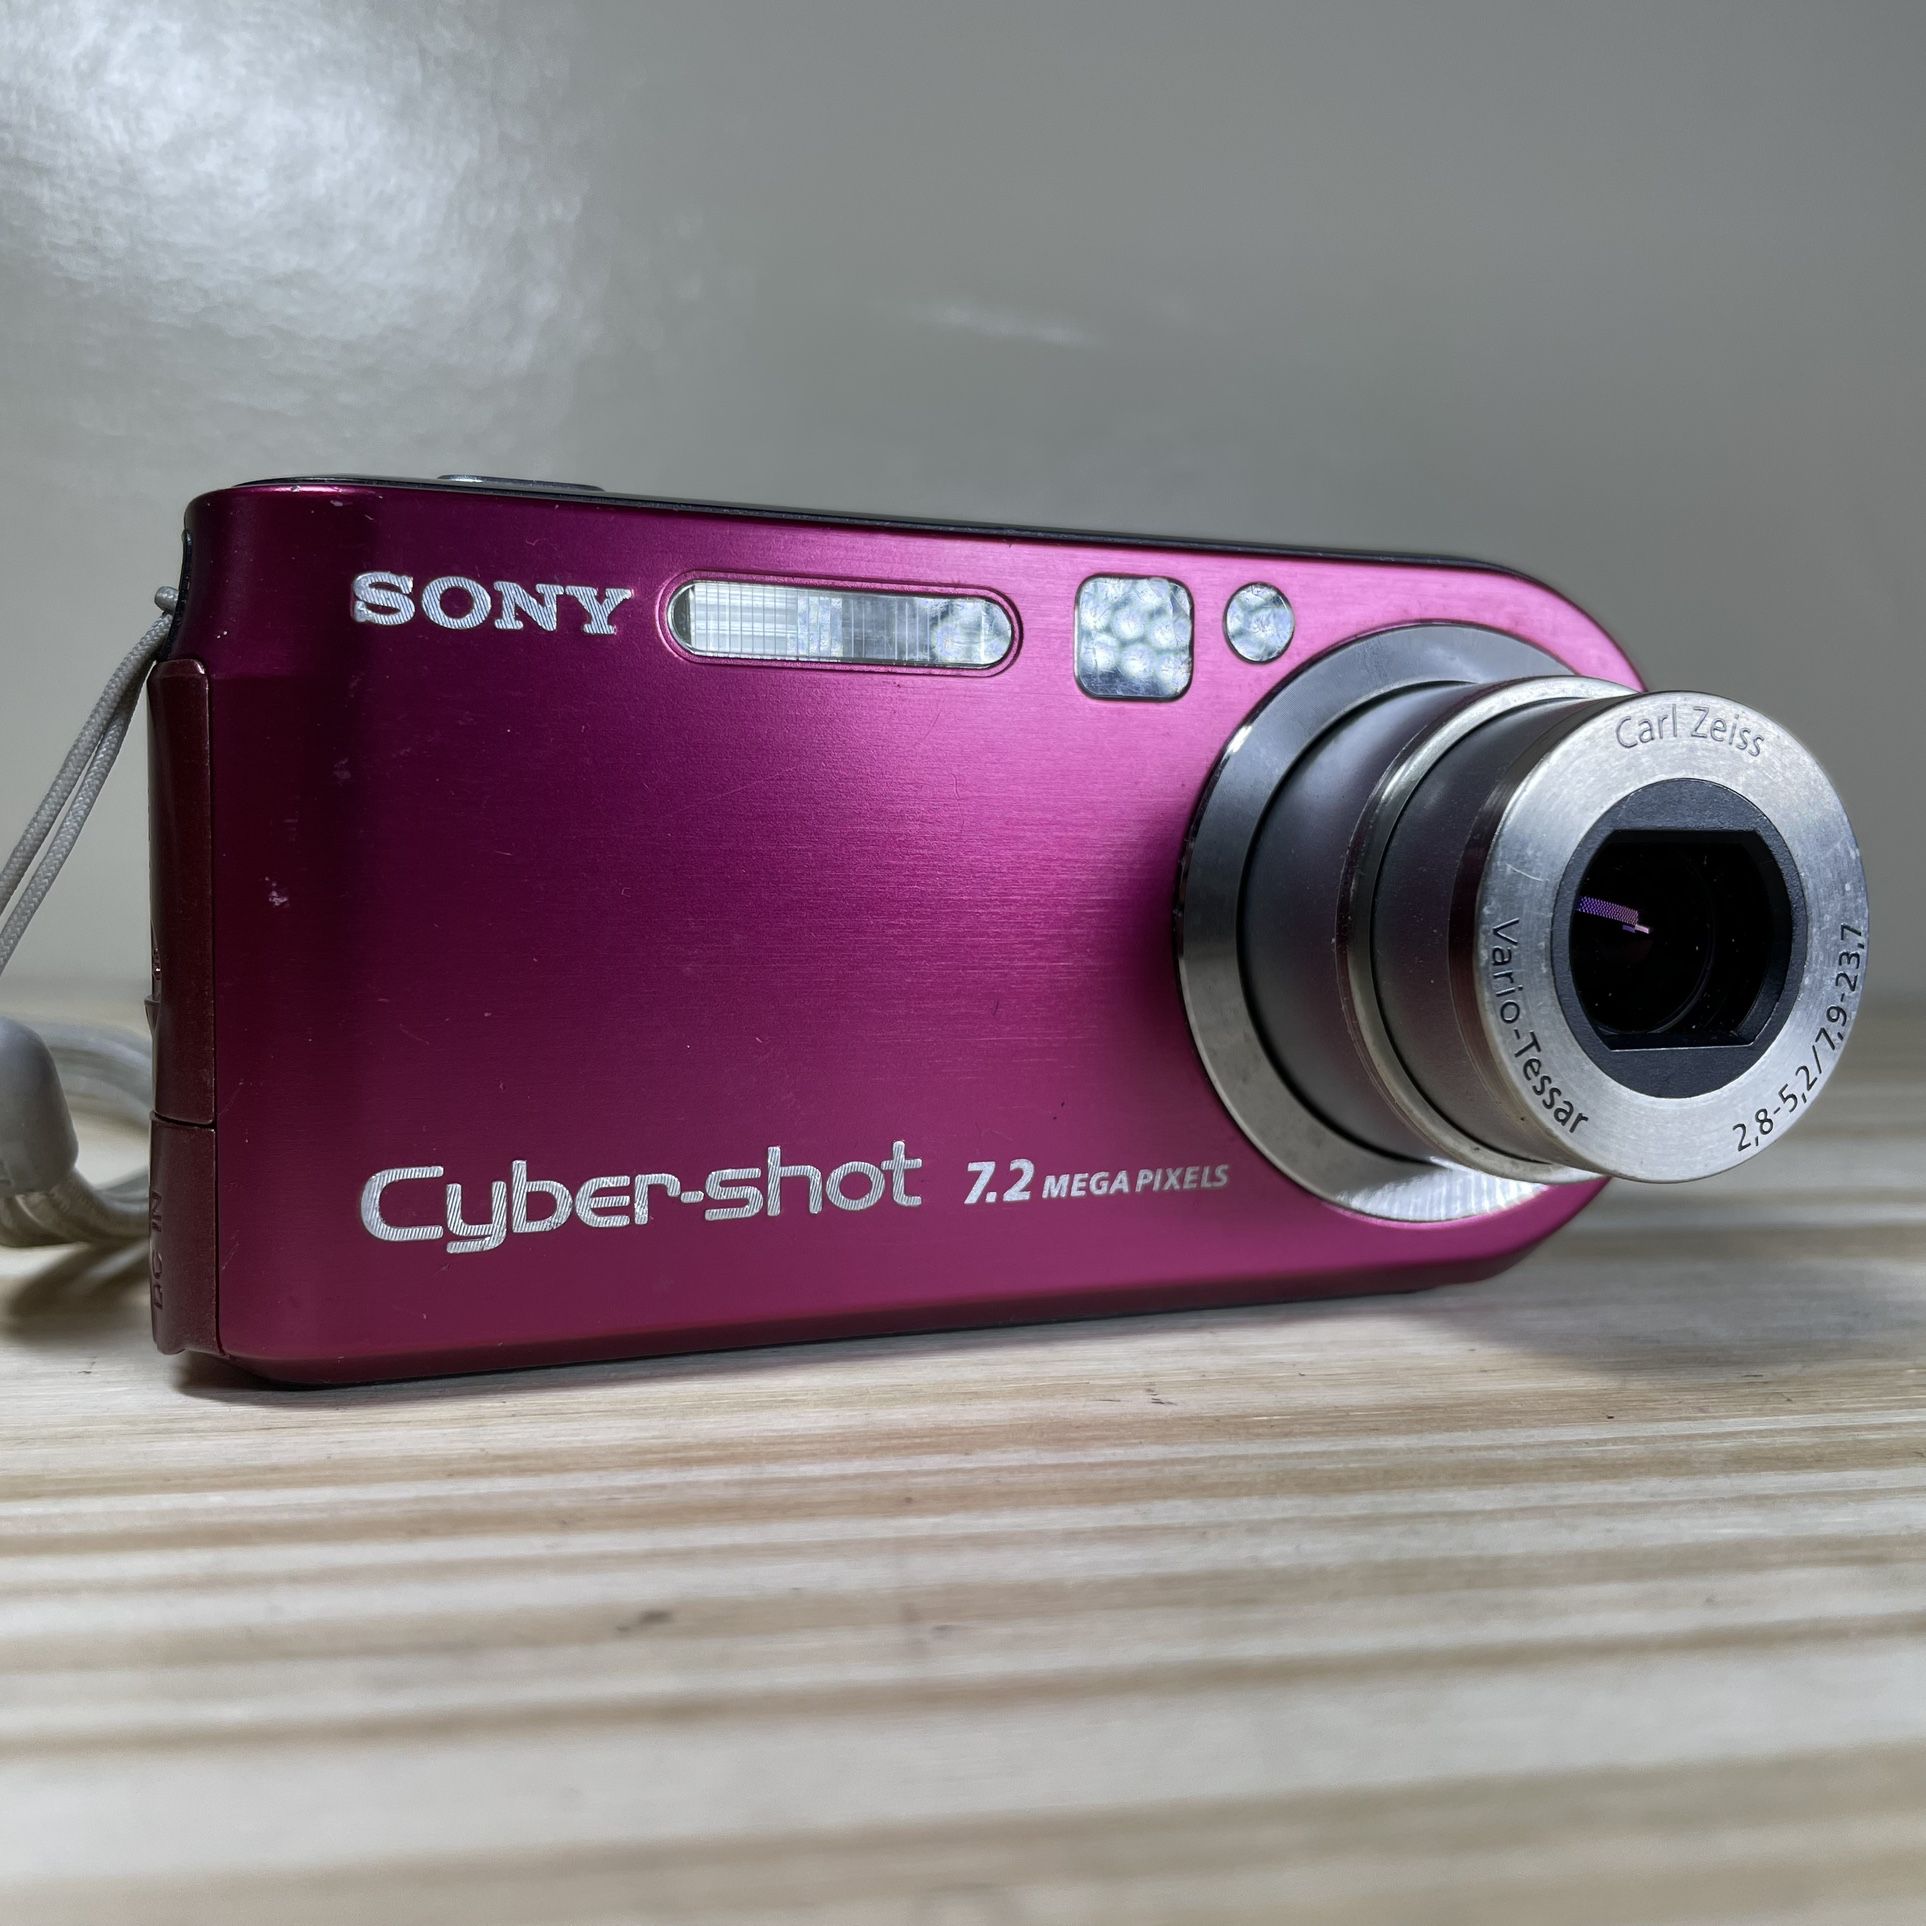 Sony Cybershot DSC-P200 7.2MP w/ Battery & Charger Tested Hot Pink Super Rare!!!.  Cant find this color anywhere. Very rare!  Check out my other cool 